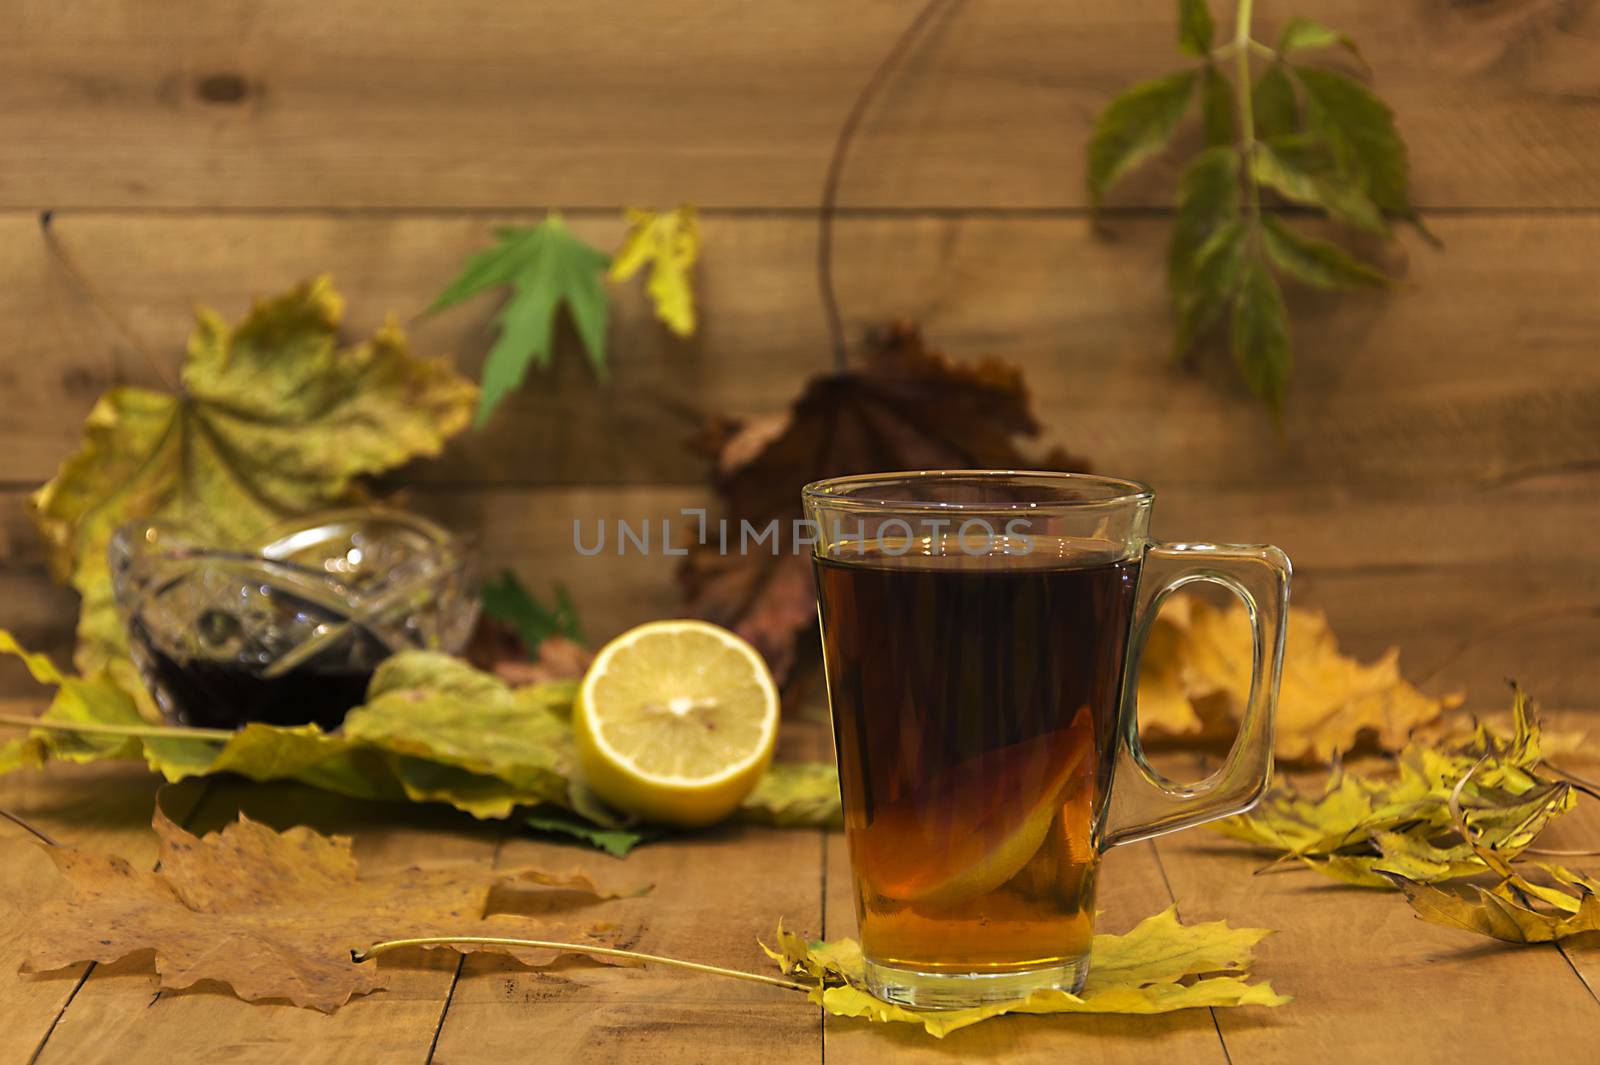 In the foreground is in focus glass cup of tea. In the background, the focus is visible without lemon, vase with jam and autumn leaves.